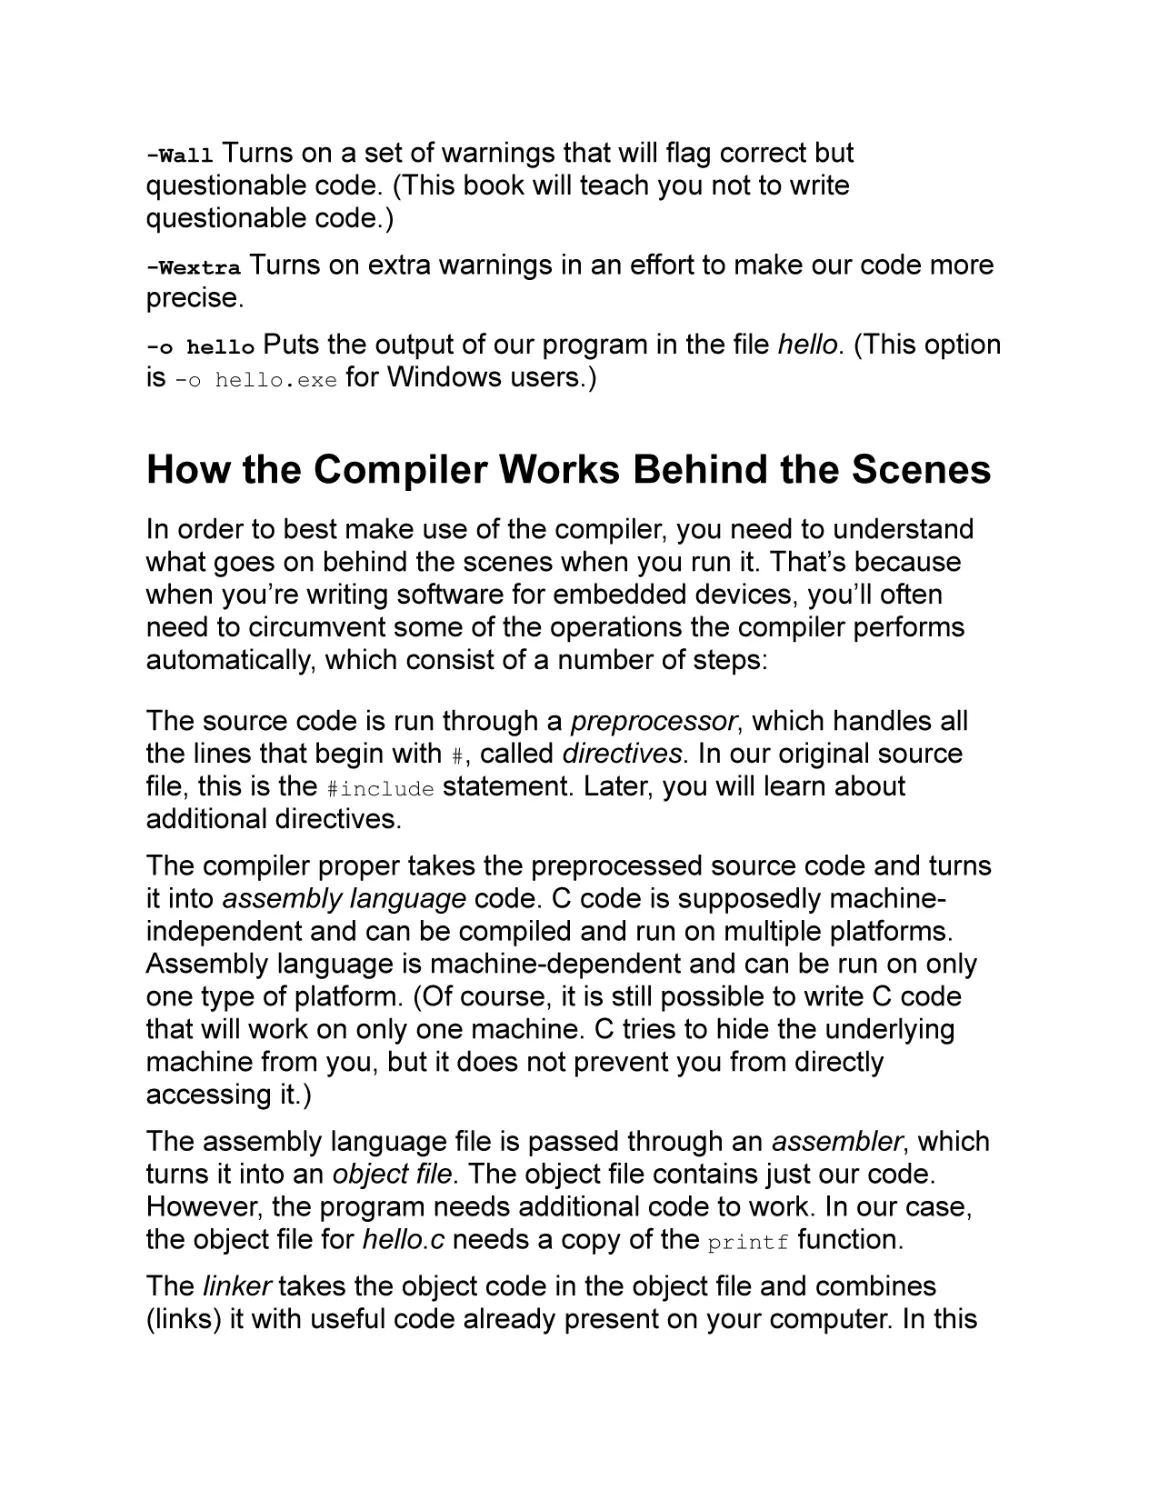 How the Compiler Works Behind the Scenes